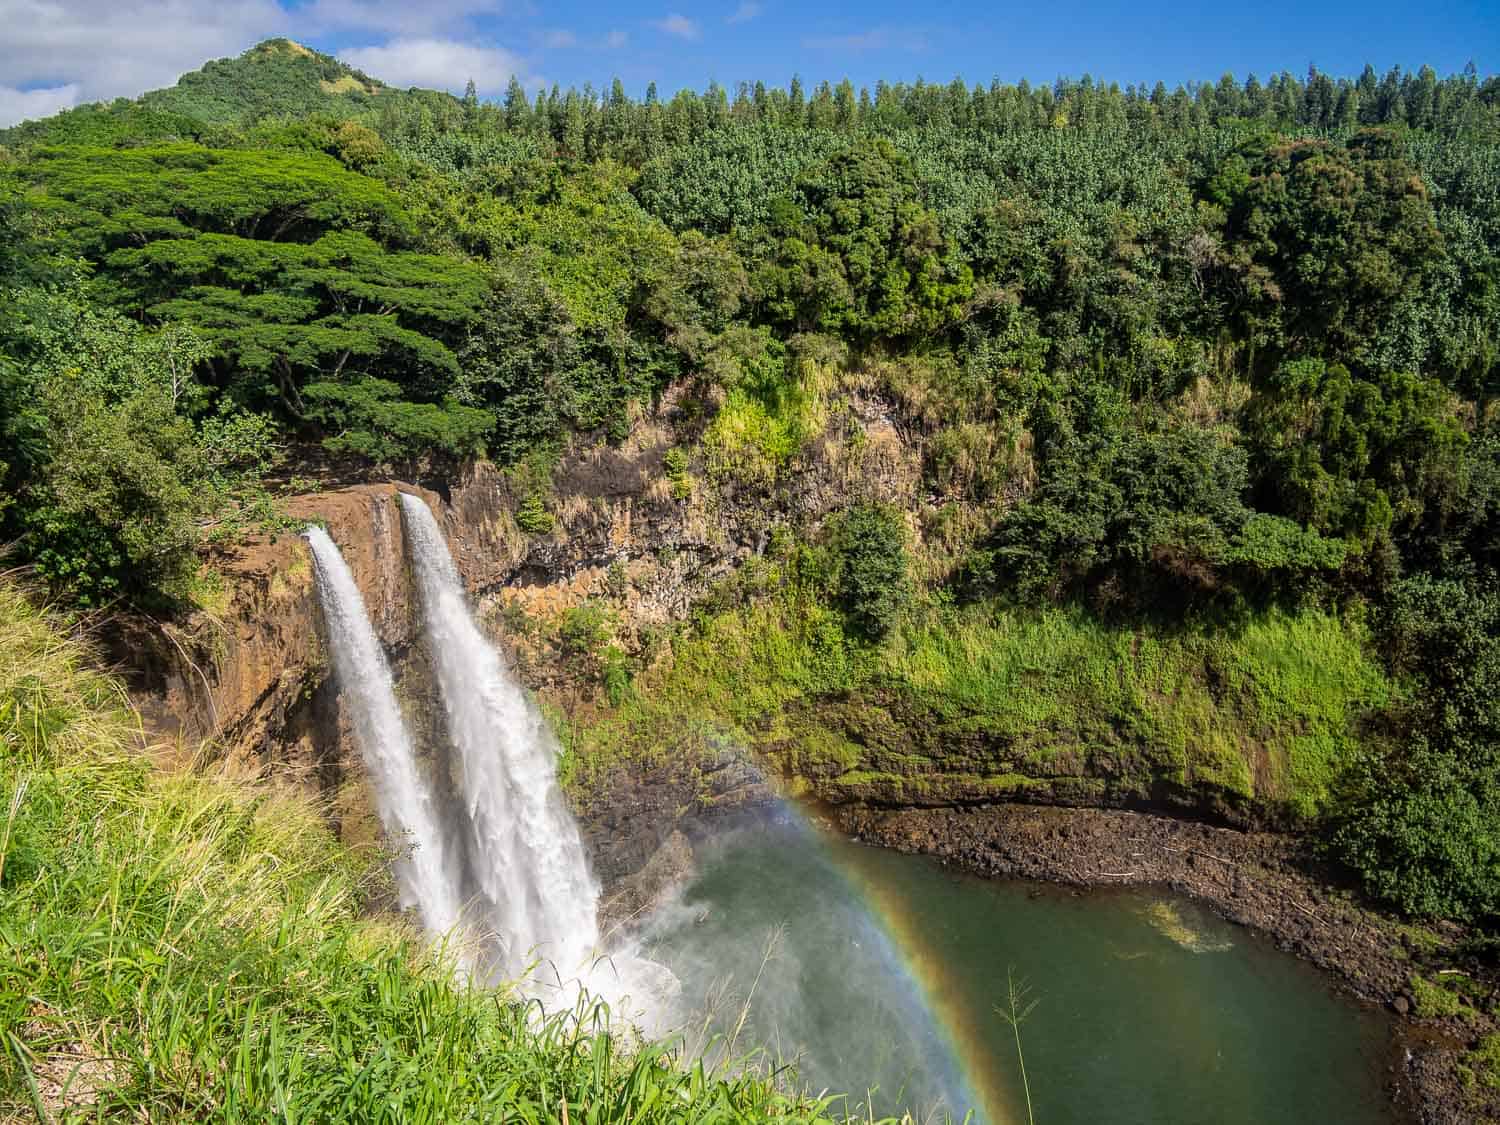 Where to Stay in Kauai: The Best Areas and Hotels